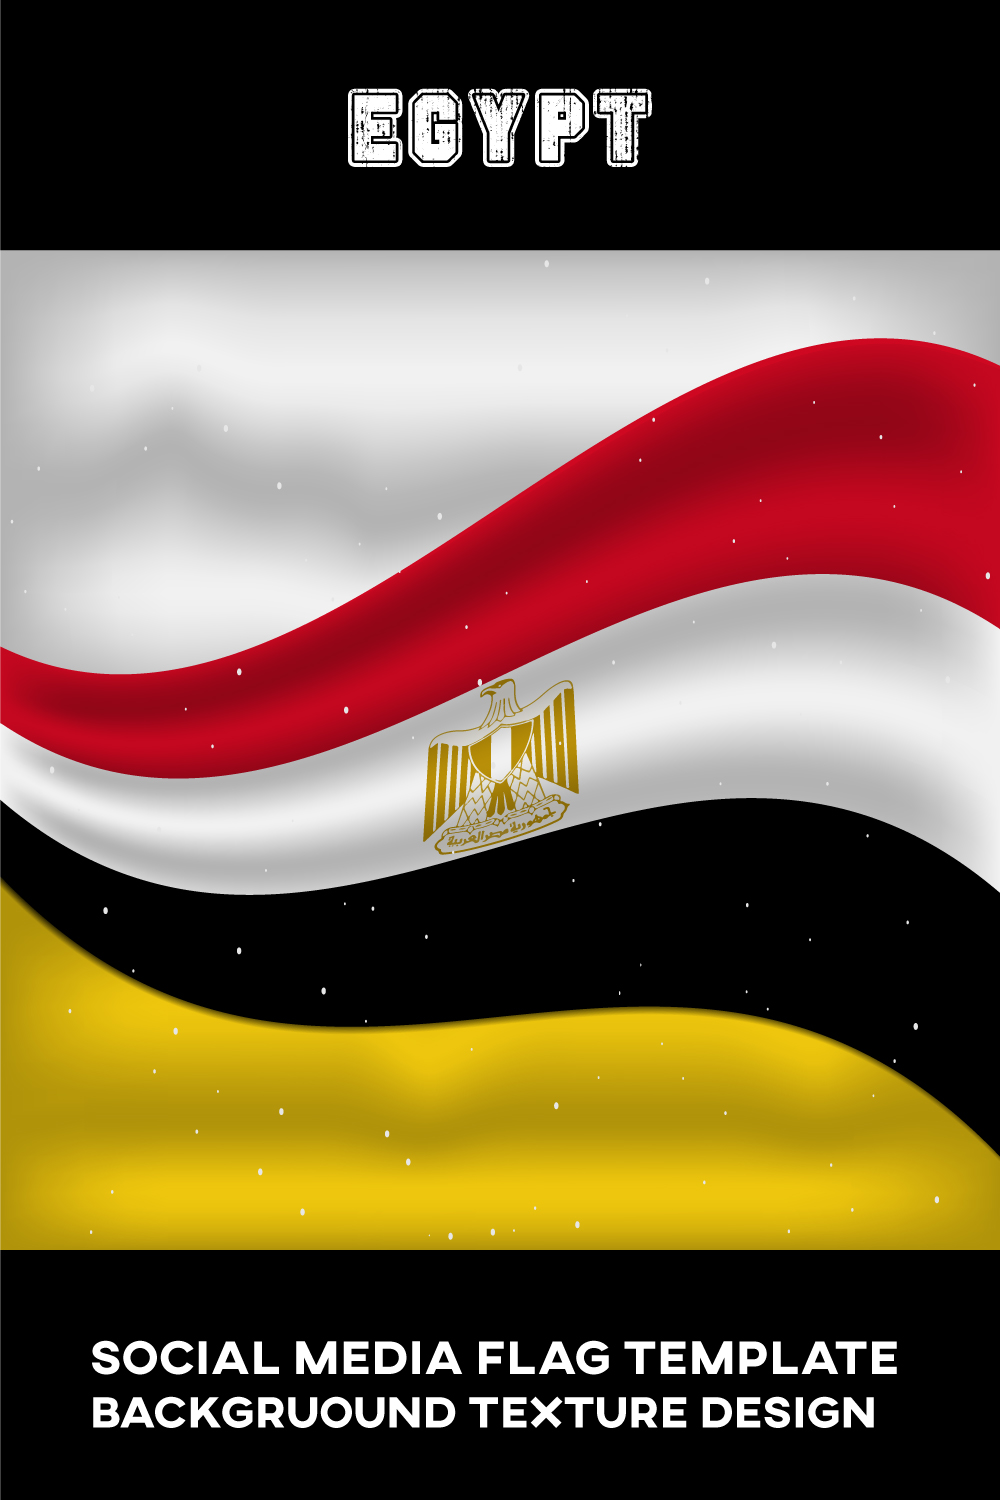 Enchanting image of the flag of Egypt.